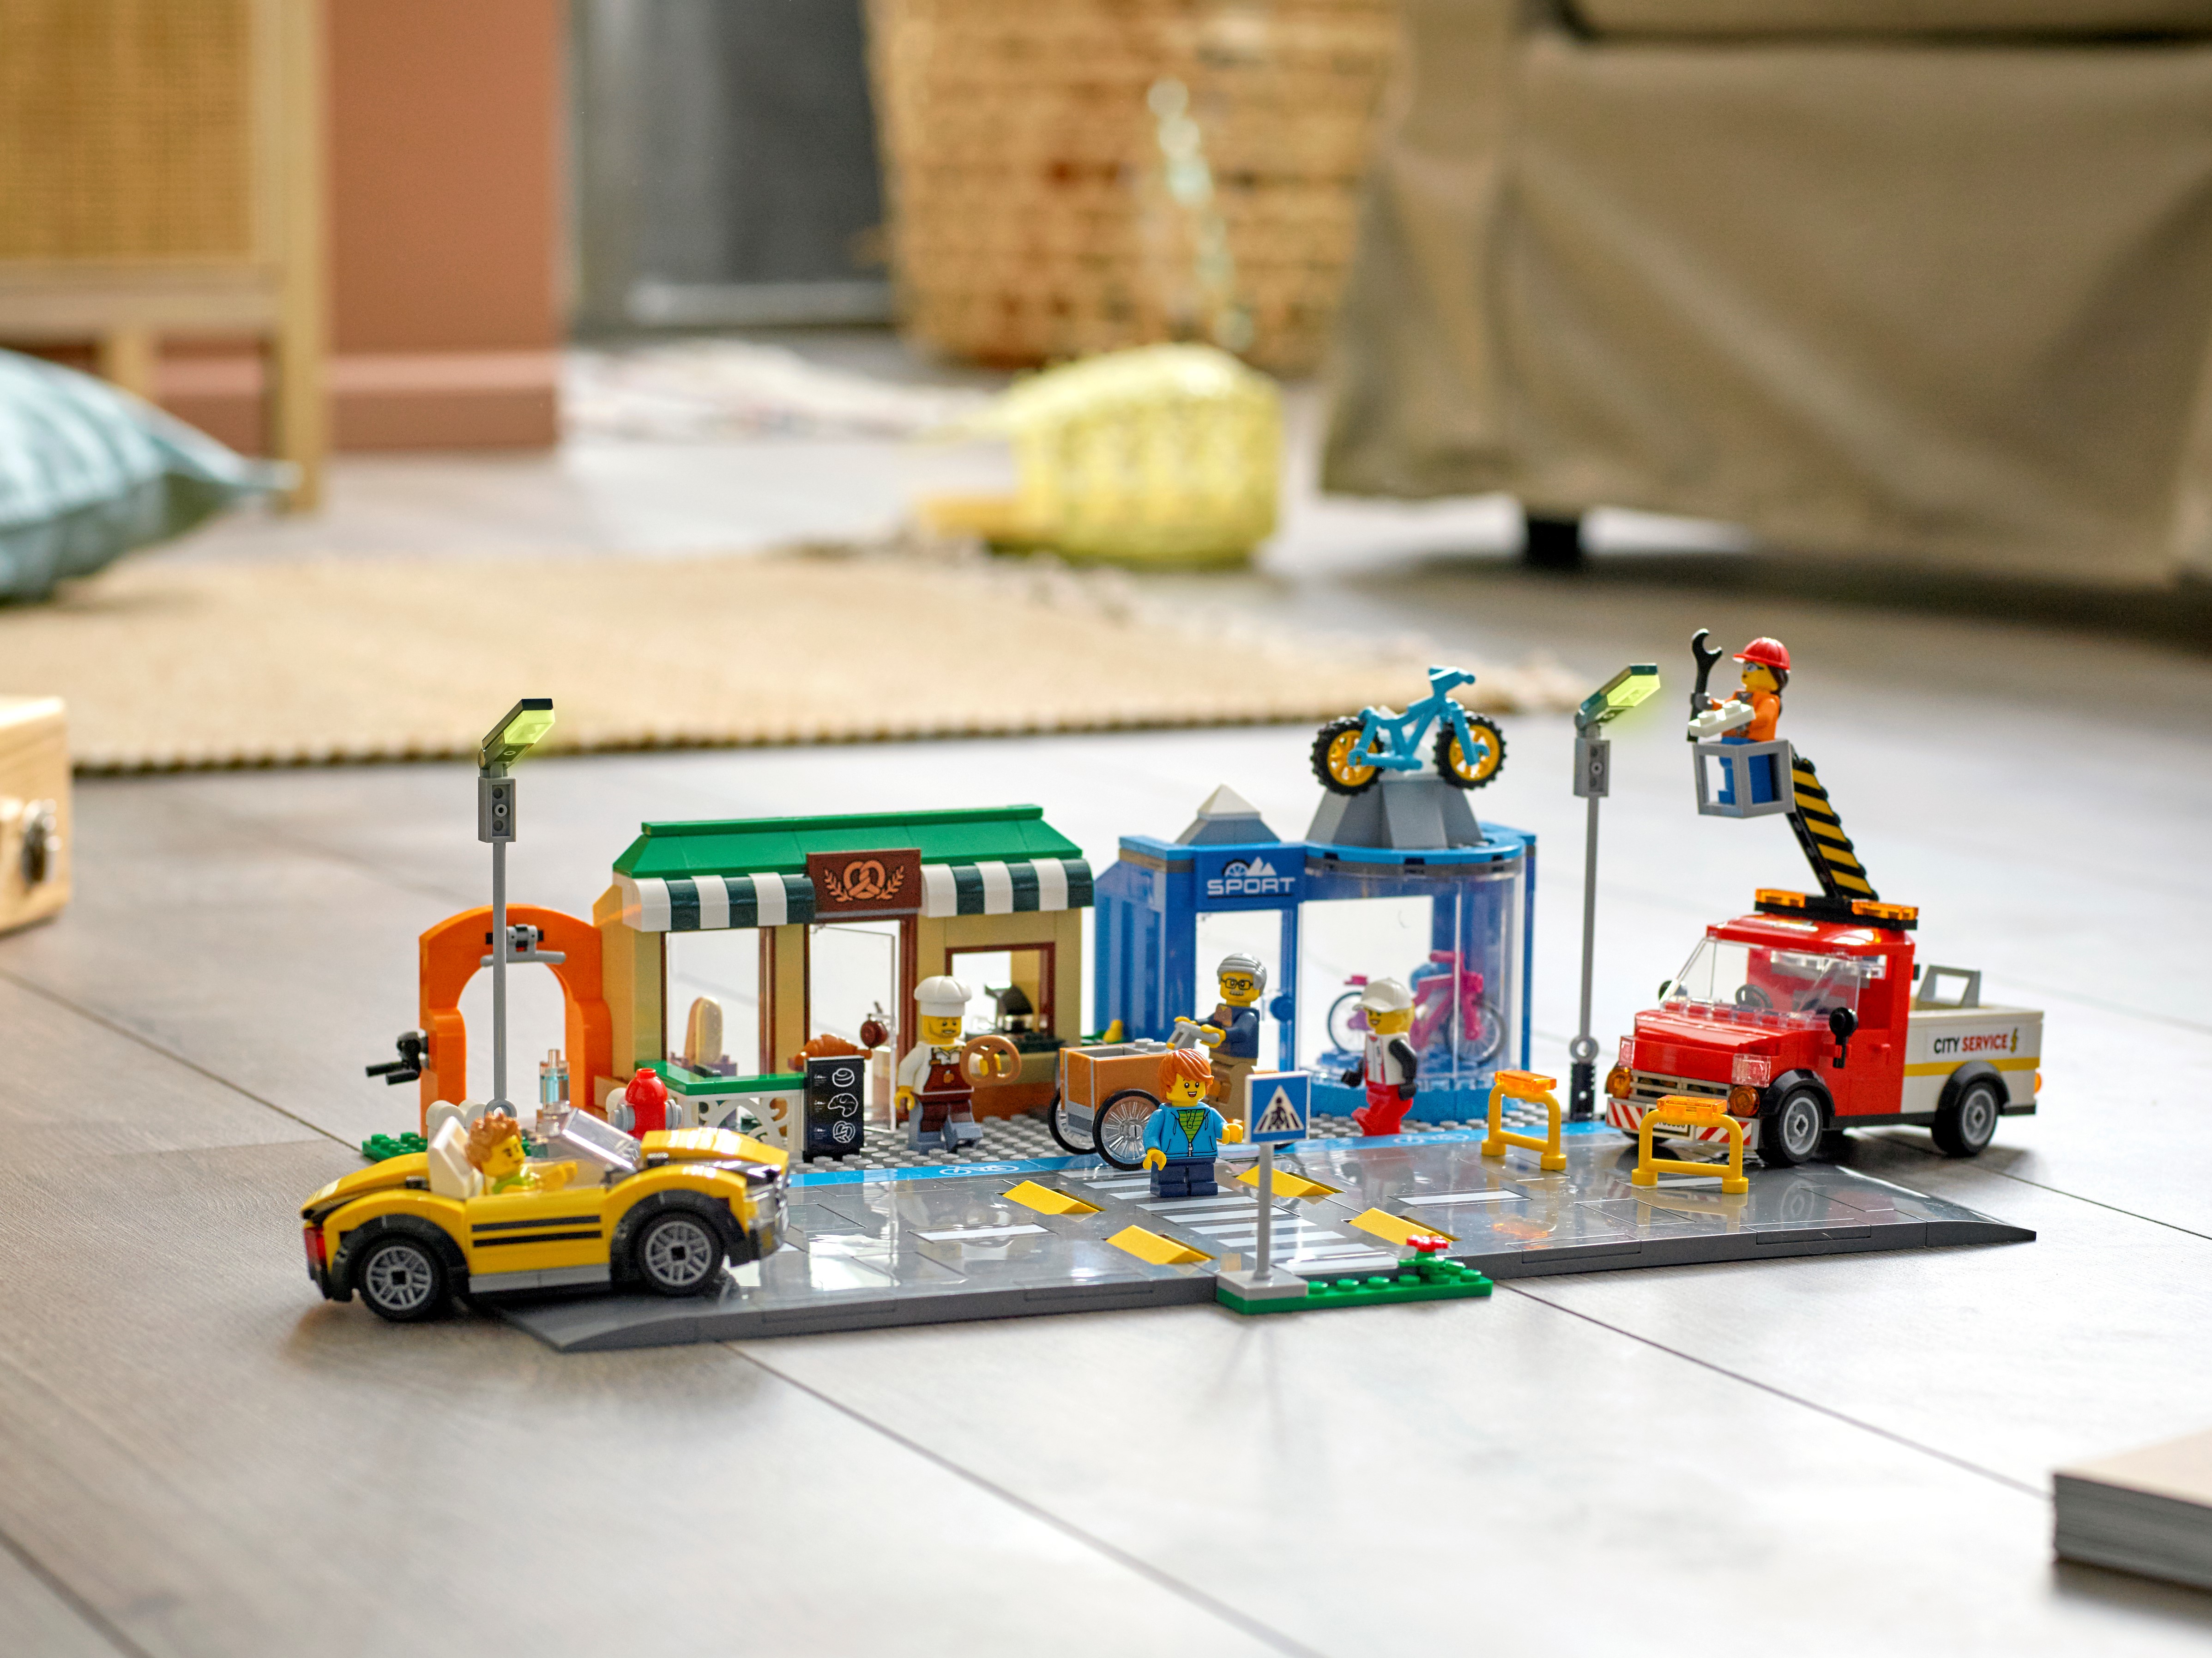 Maxim Onderdompeling roddel Shopping Street 60306 | City | Buy online at the Official LEGO® Shop US